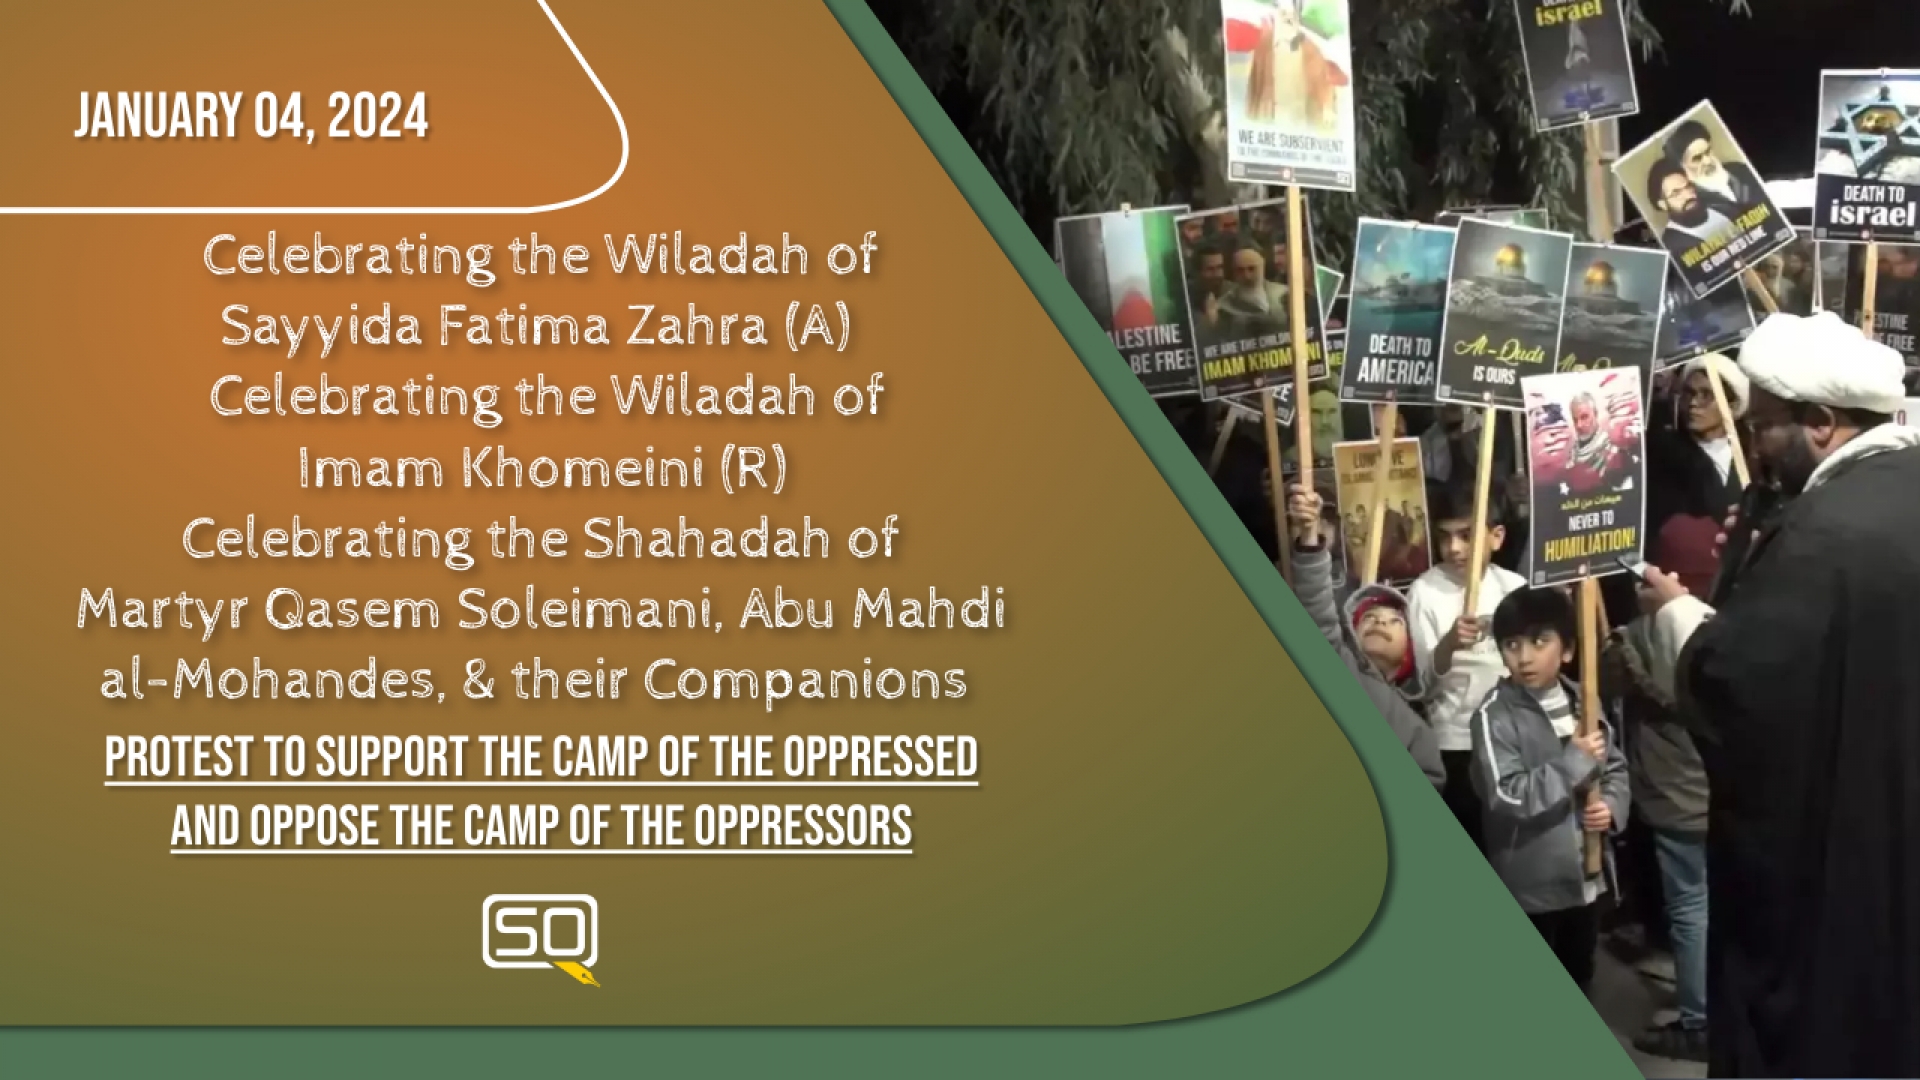 (04January2024) Protest To Support The Camp Of The Oppressed And Oppose The Camp Of The Oppressors | Celebrating the Wiladah of Sayyida Fatima Zahra (A) Celebrating the Wiladah of Imam Khomeini (R) Celebrating the Shahadah of Martyr Qasem Soleimani, Abu Mahdi al-Mohandes, & their Companions | English